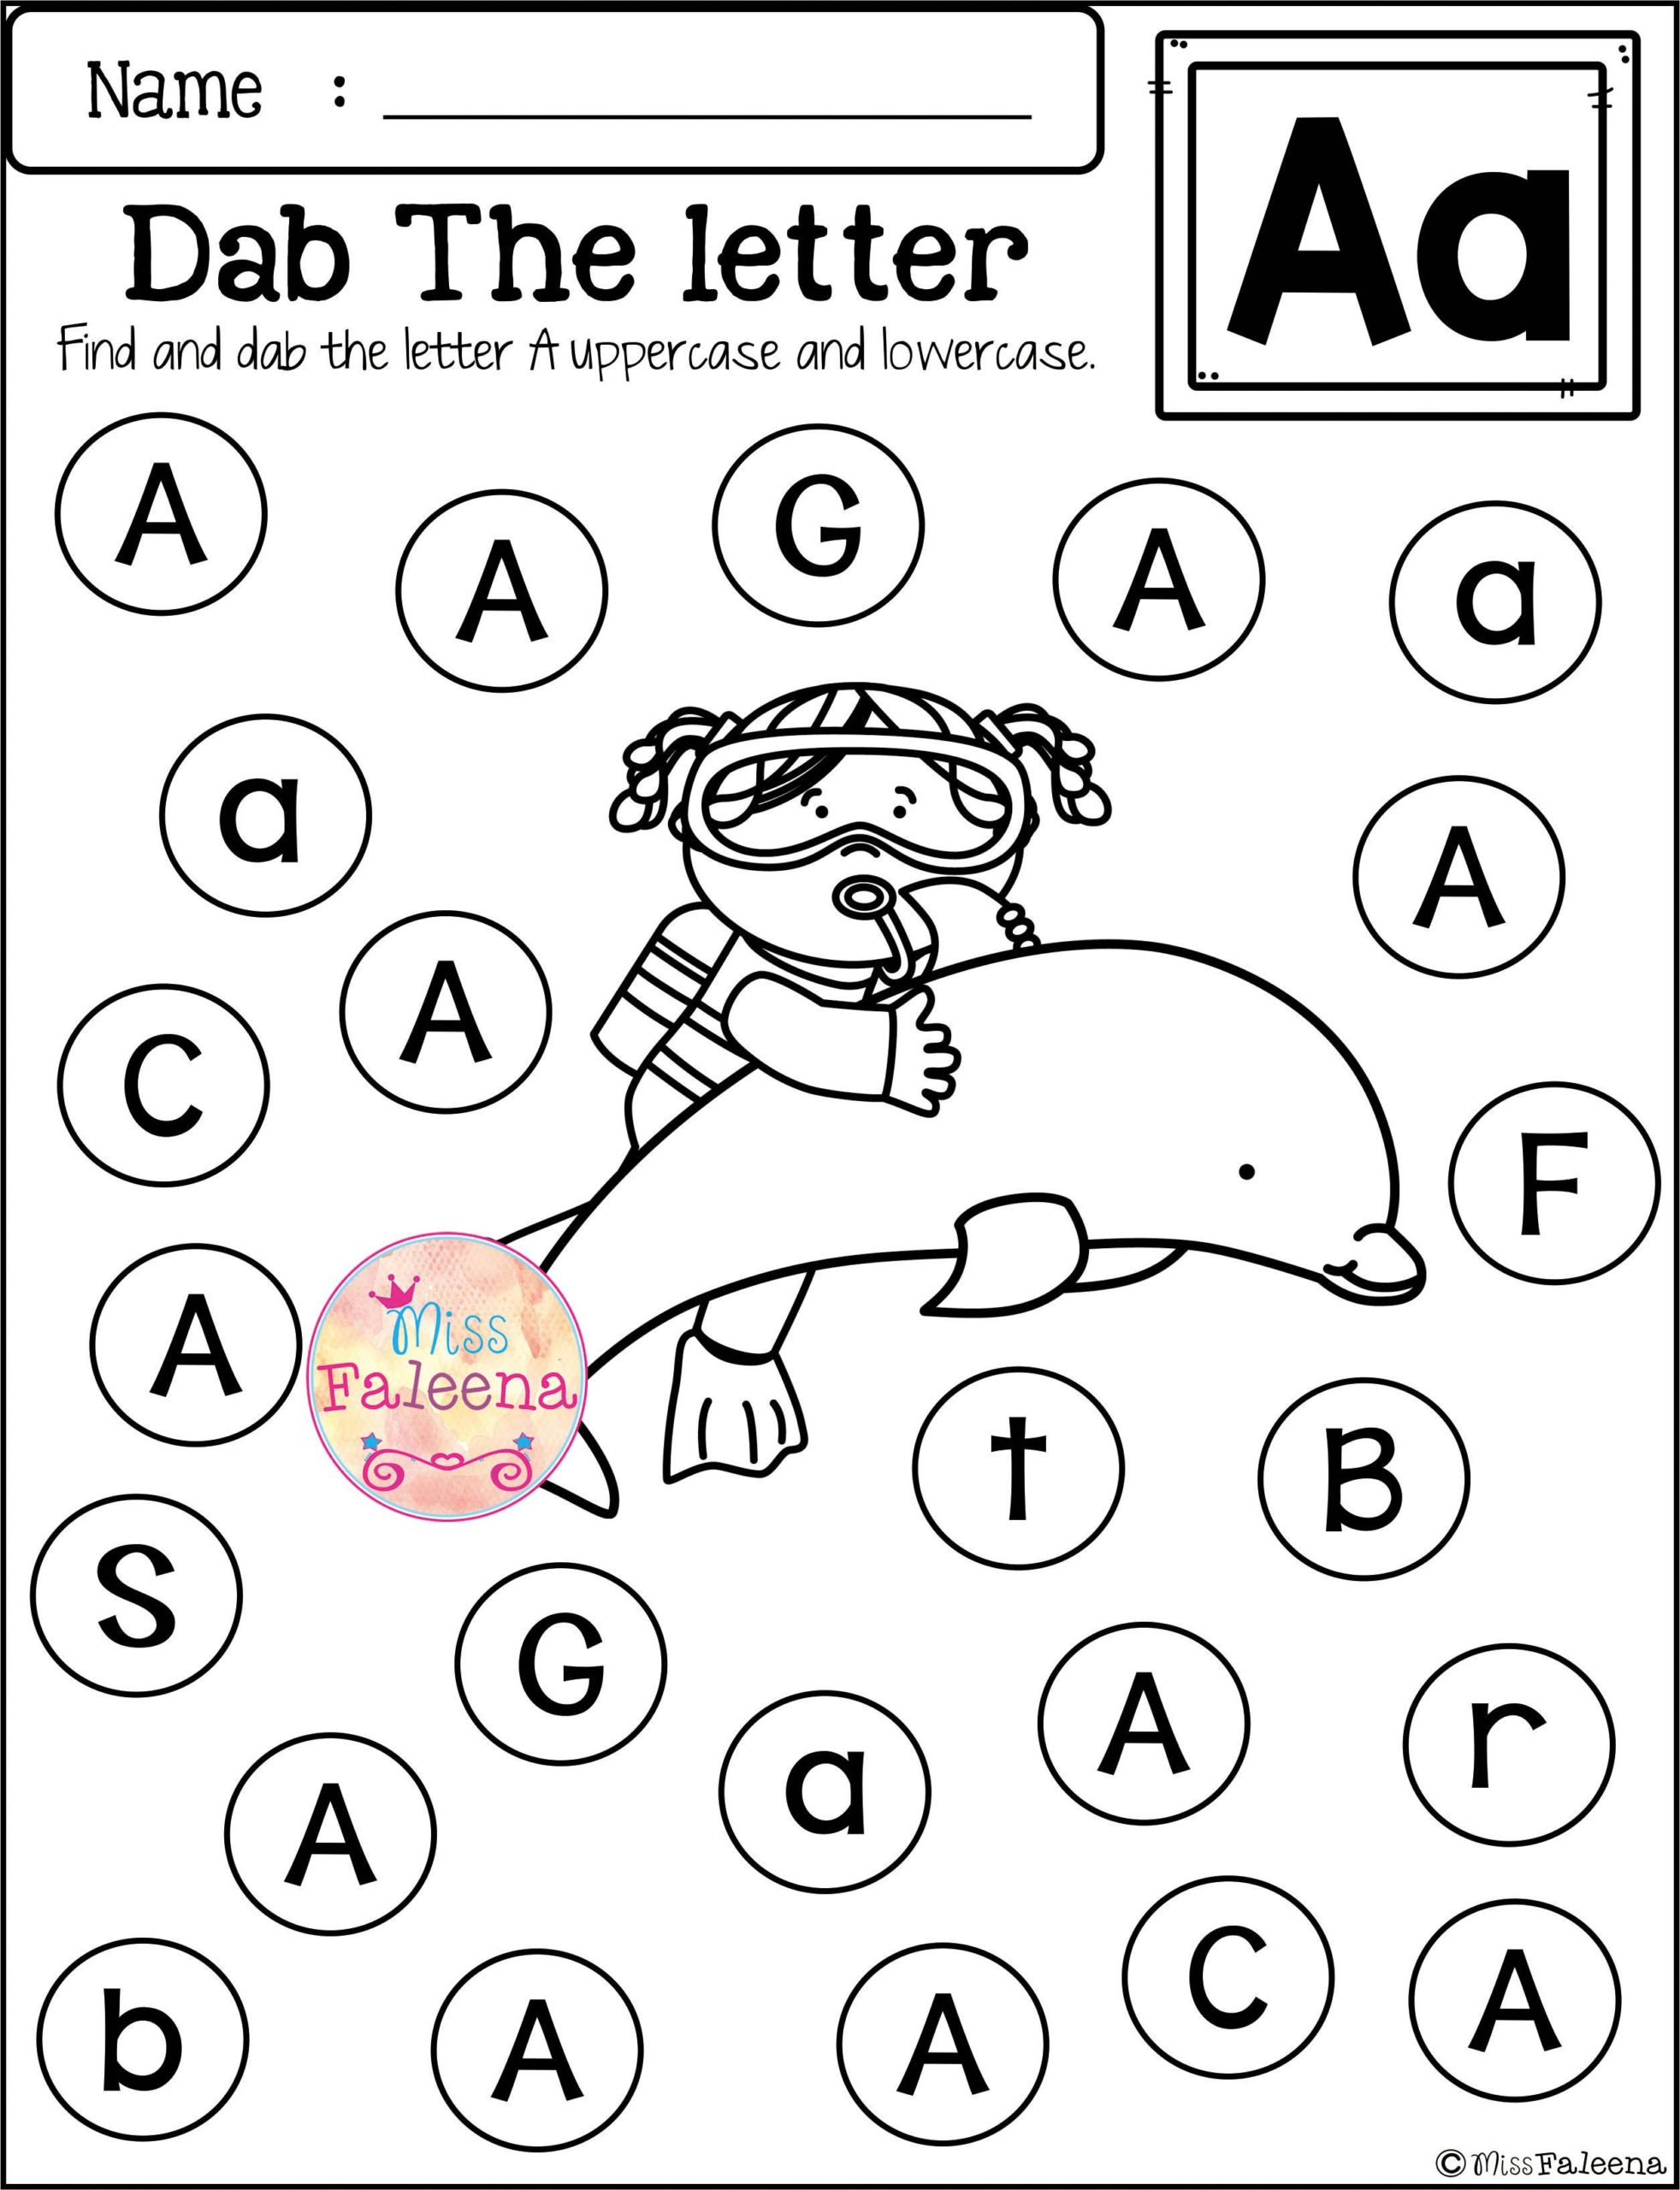 Alphabet Review Worksheets For Pre Worksheet Free Bingo Card throughout Alphabet Review Worksheets For First Grade